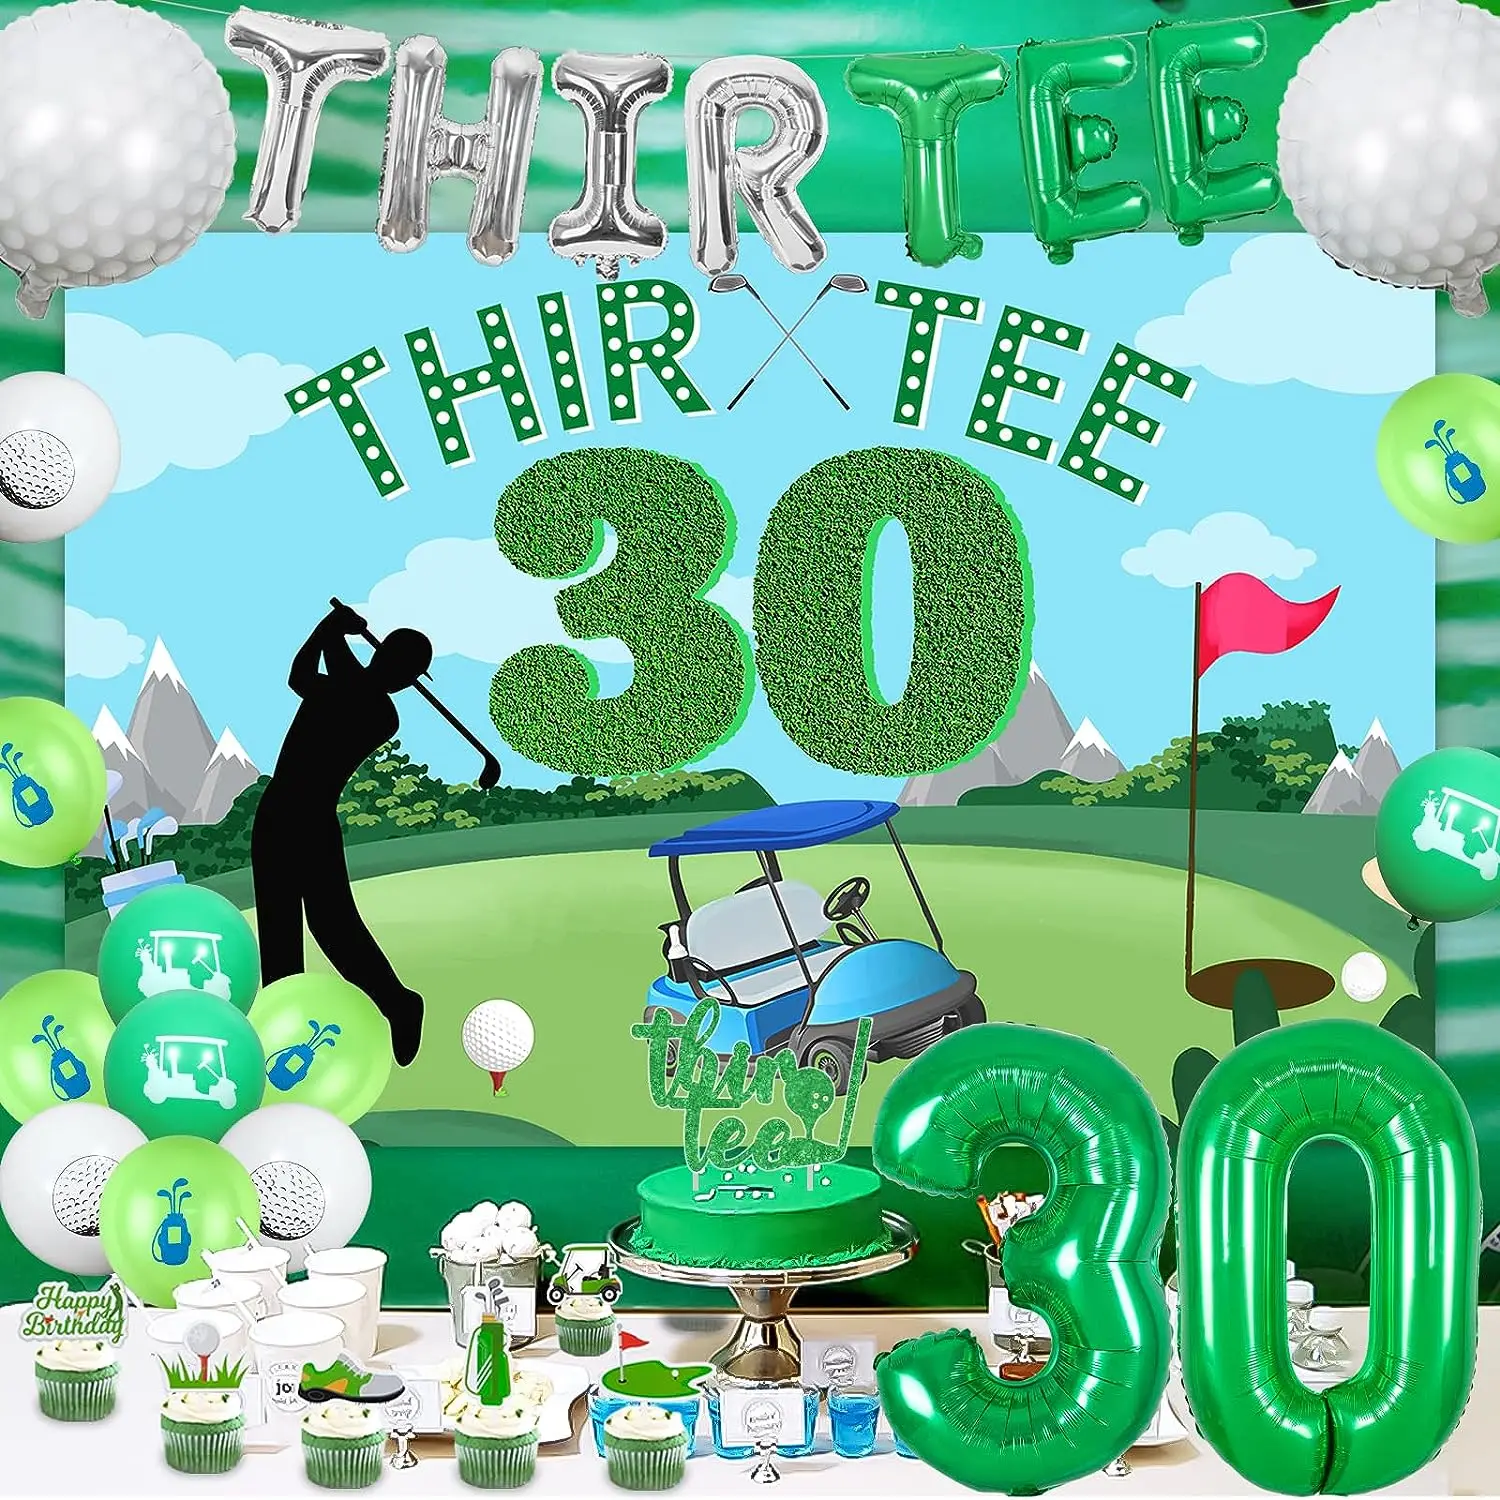 

Golf Birthday Party Decorations, Green Thir Tee Backdrop, Balloon Banner, Cake Topper, Golfer Sports Supplies, 30 Years, 30th, 4